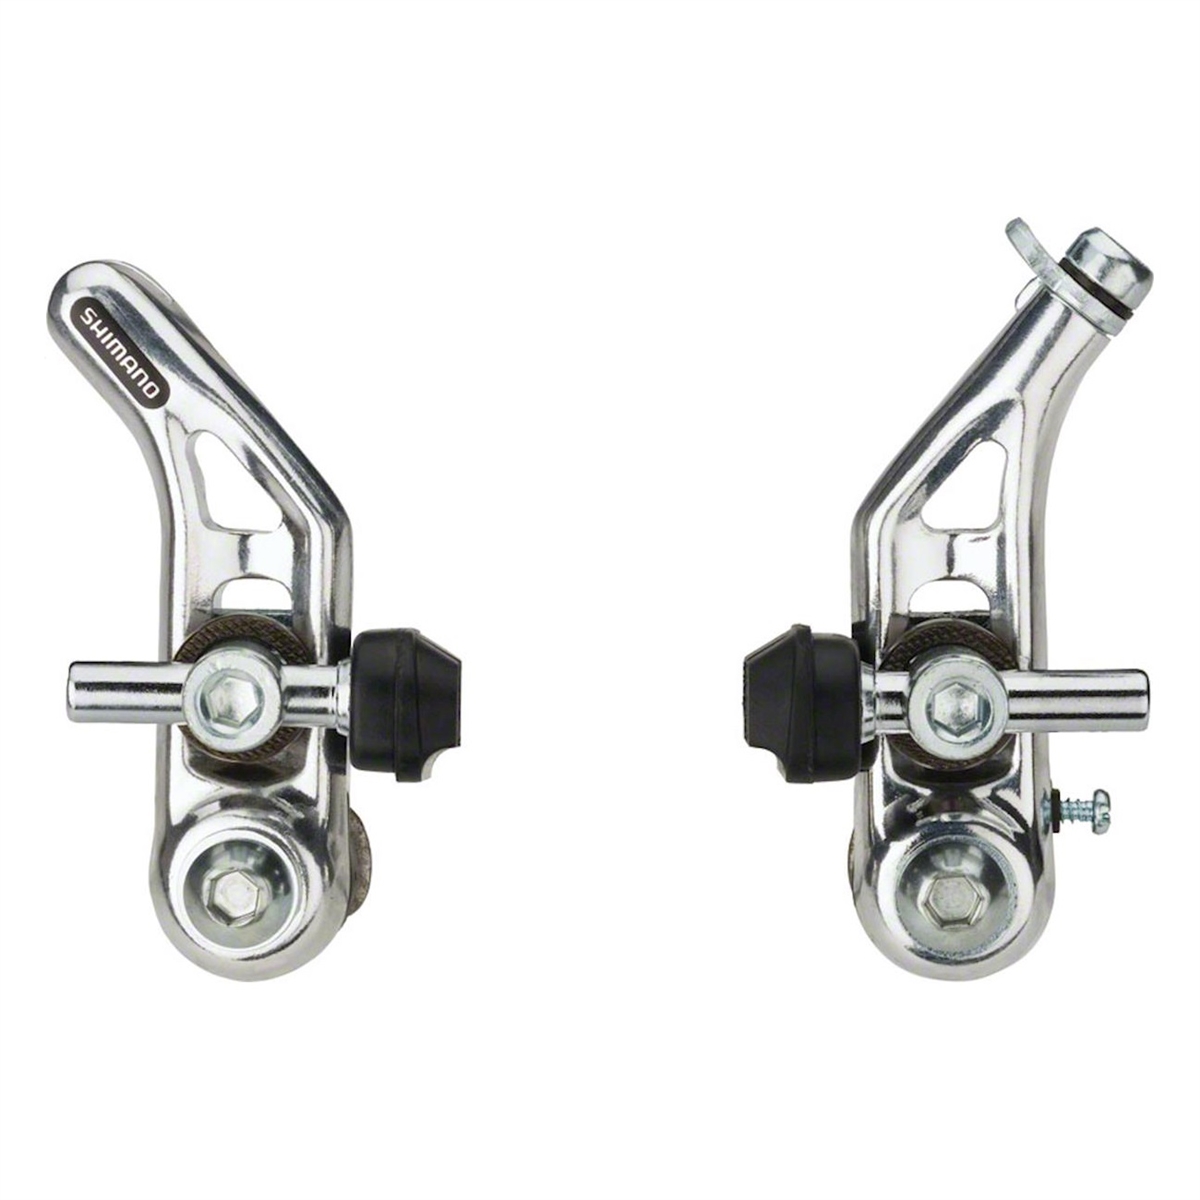 Cantilever front brake br-ct 91 silver